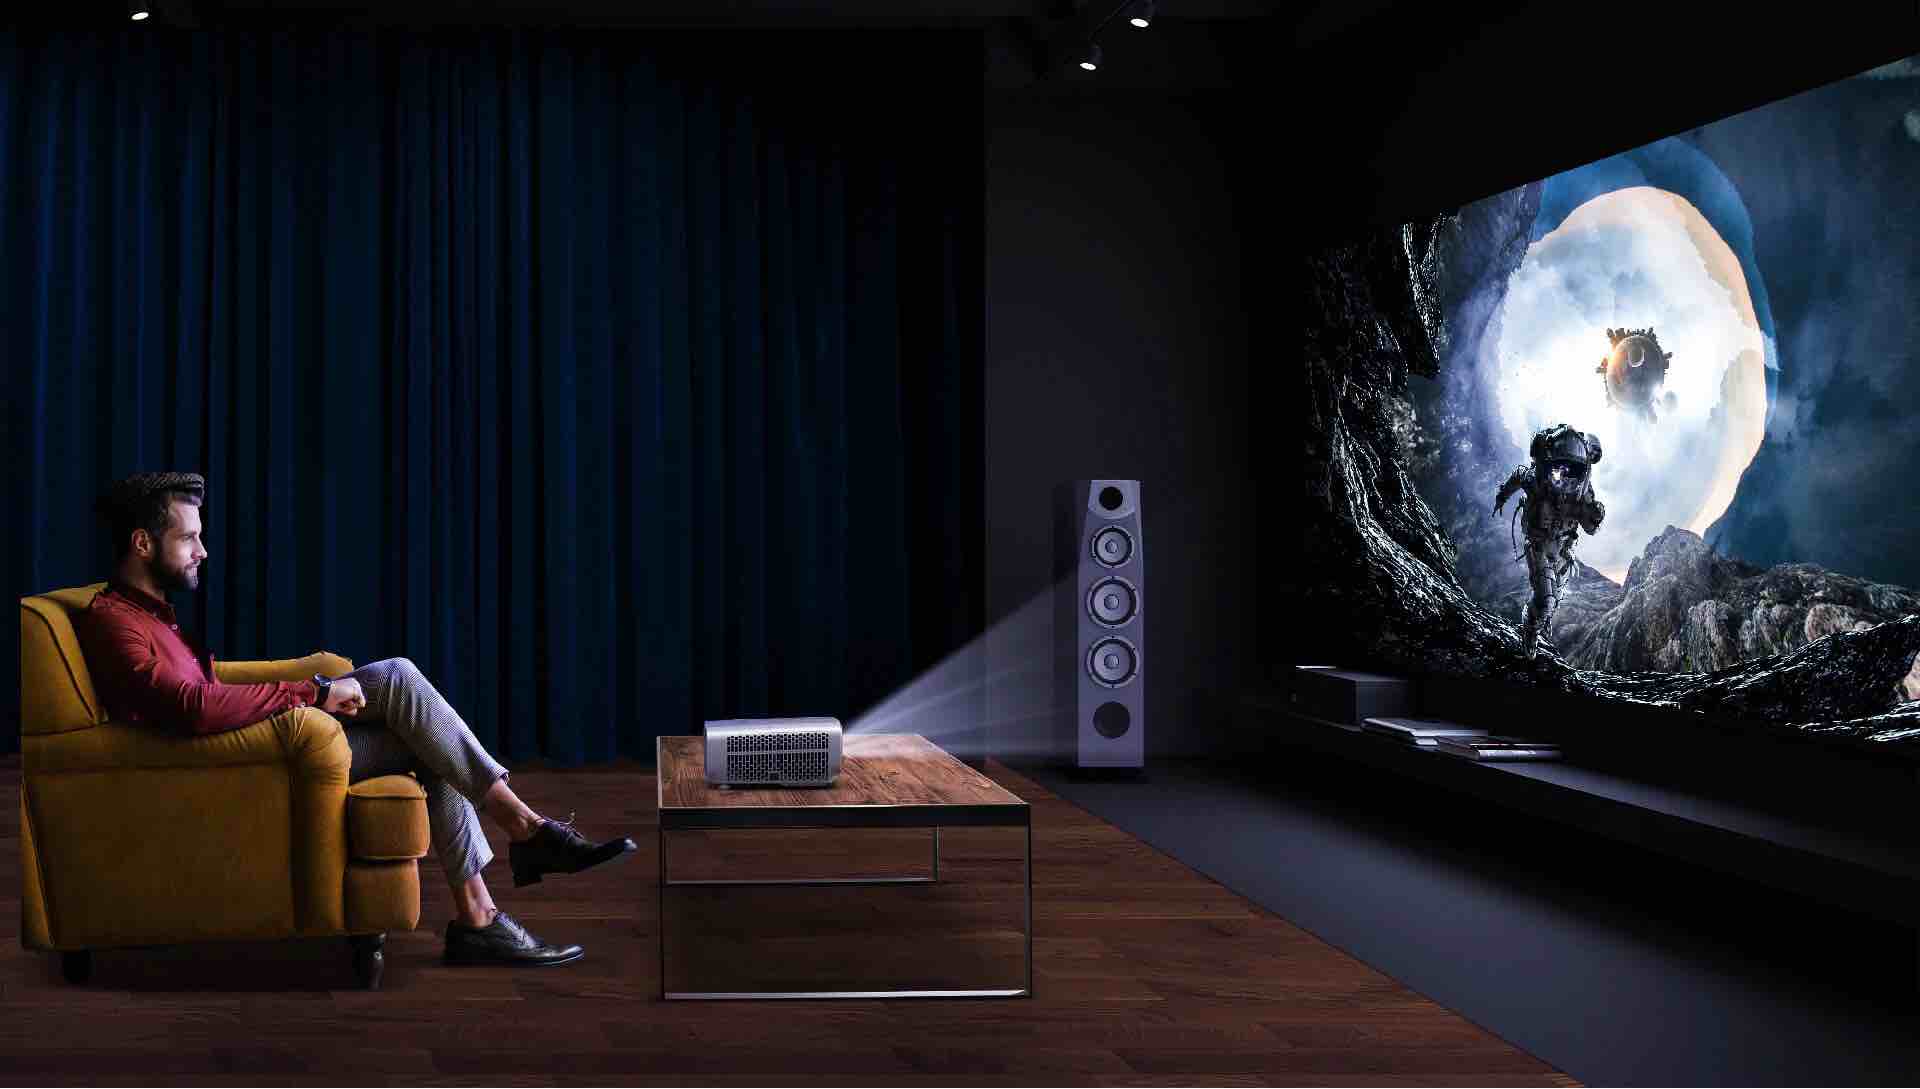 4K home theatre projector